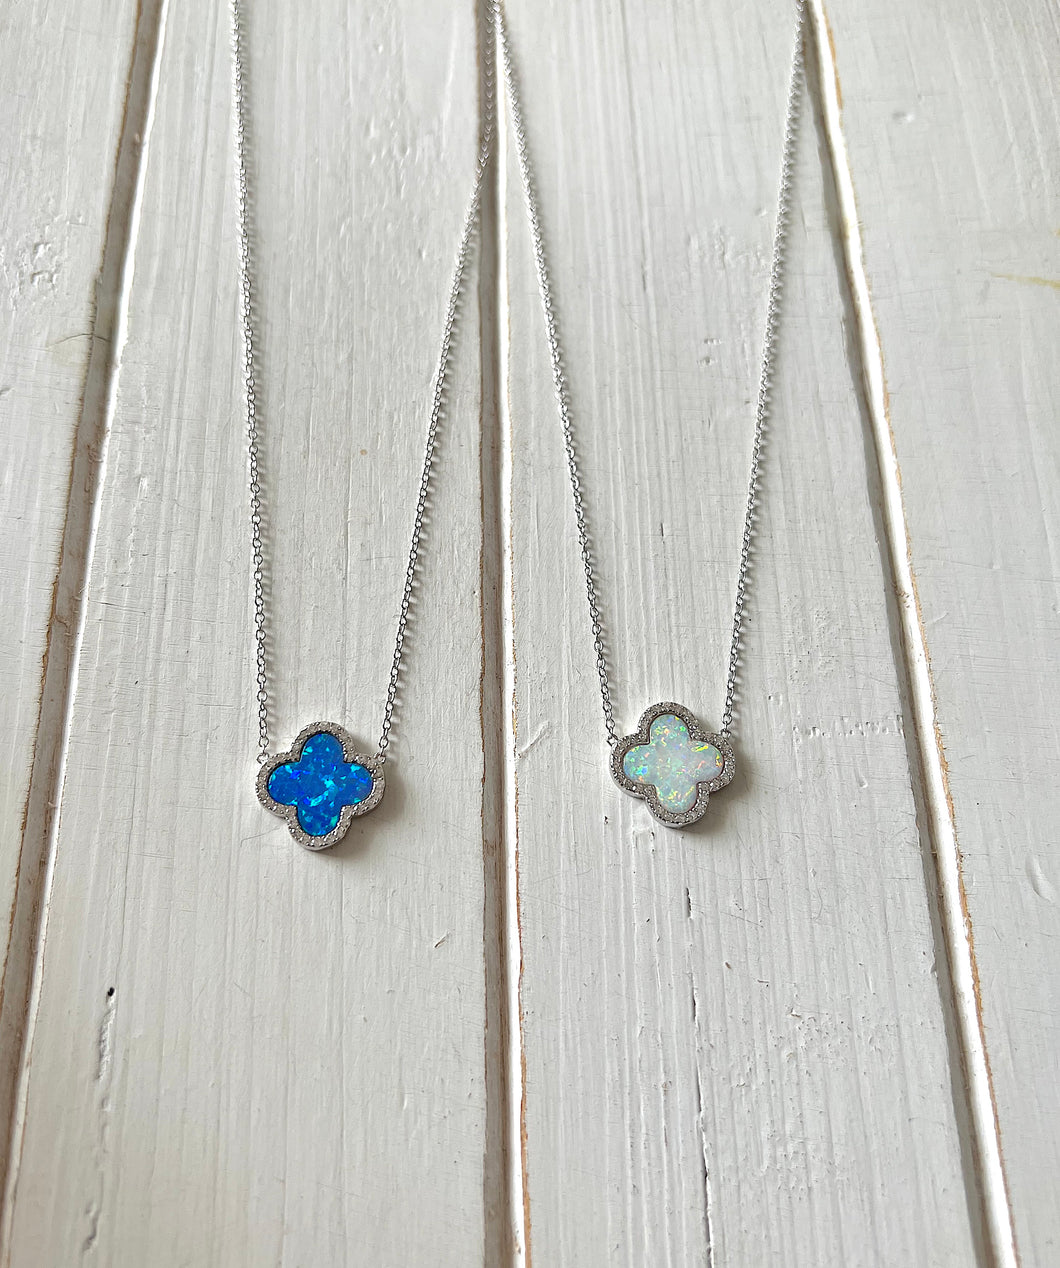 Clover necklace with Opal